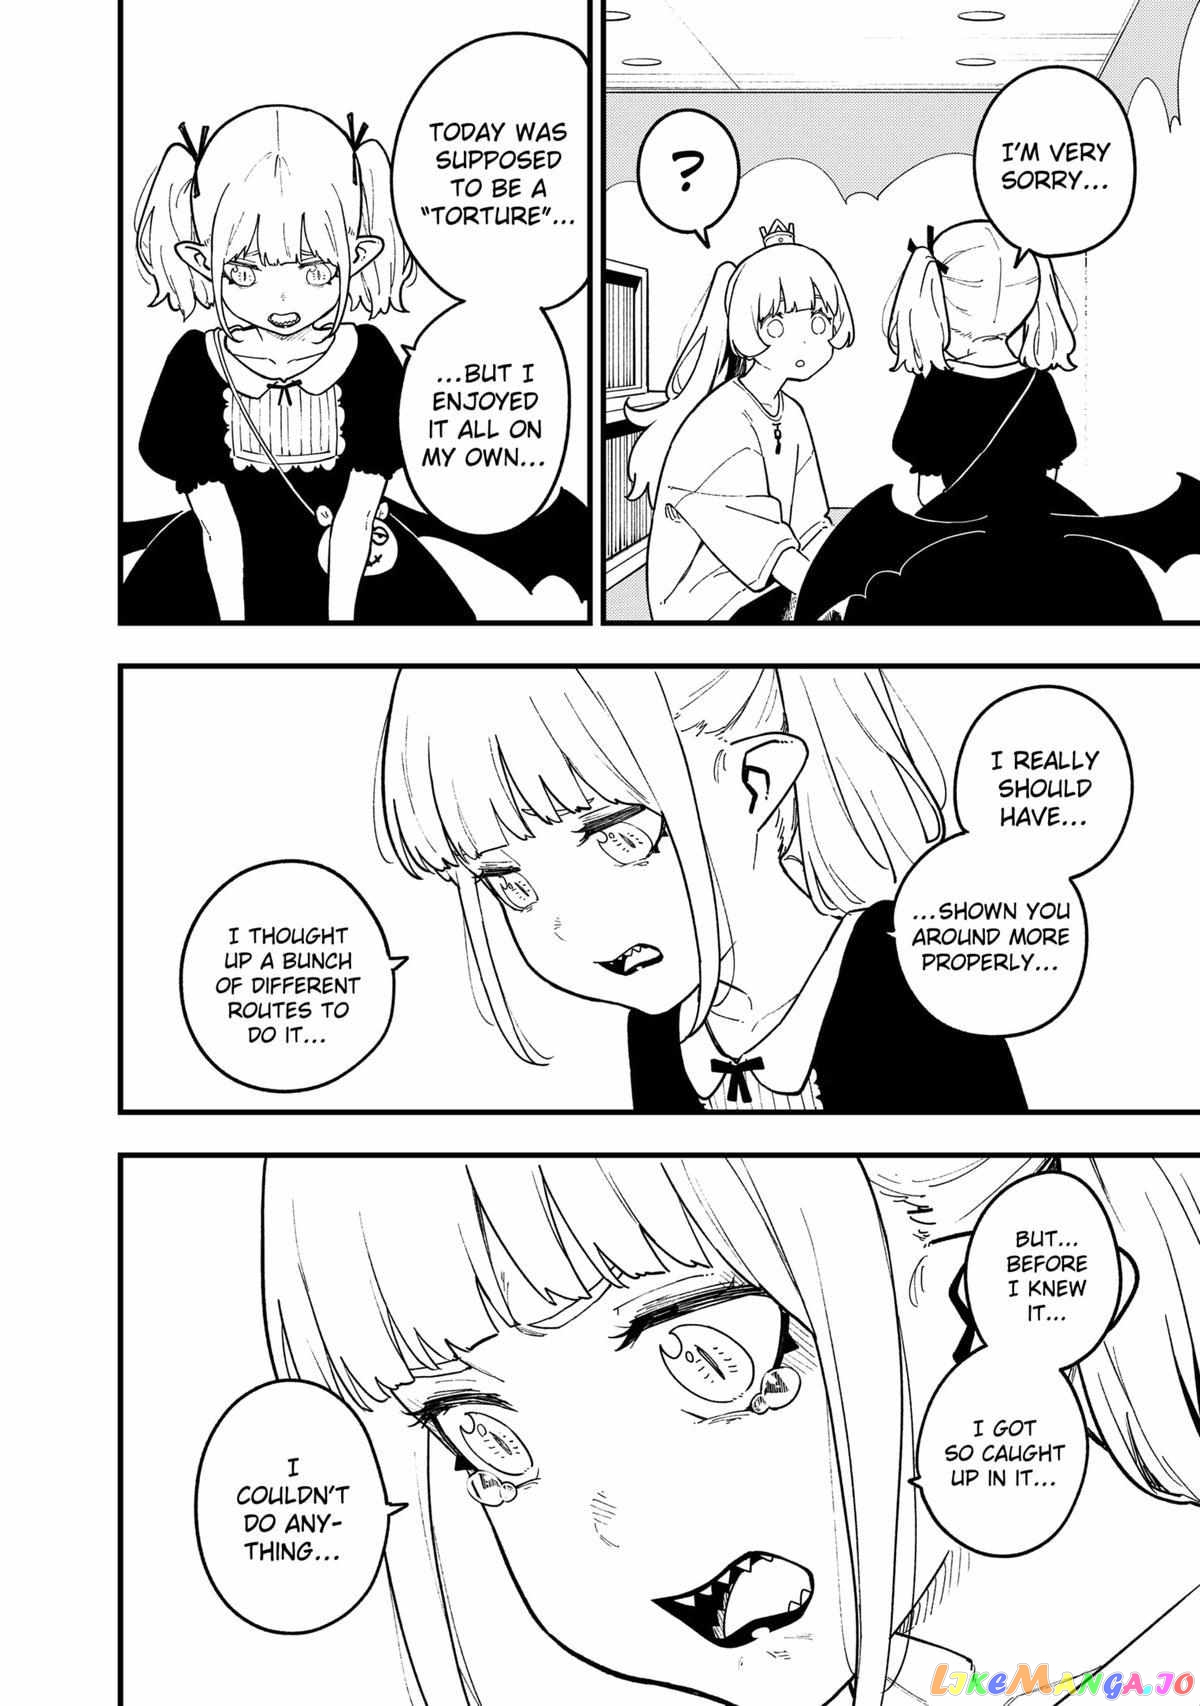 It's Time for "Interrogation", Princess! chapter 199 - page 8